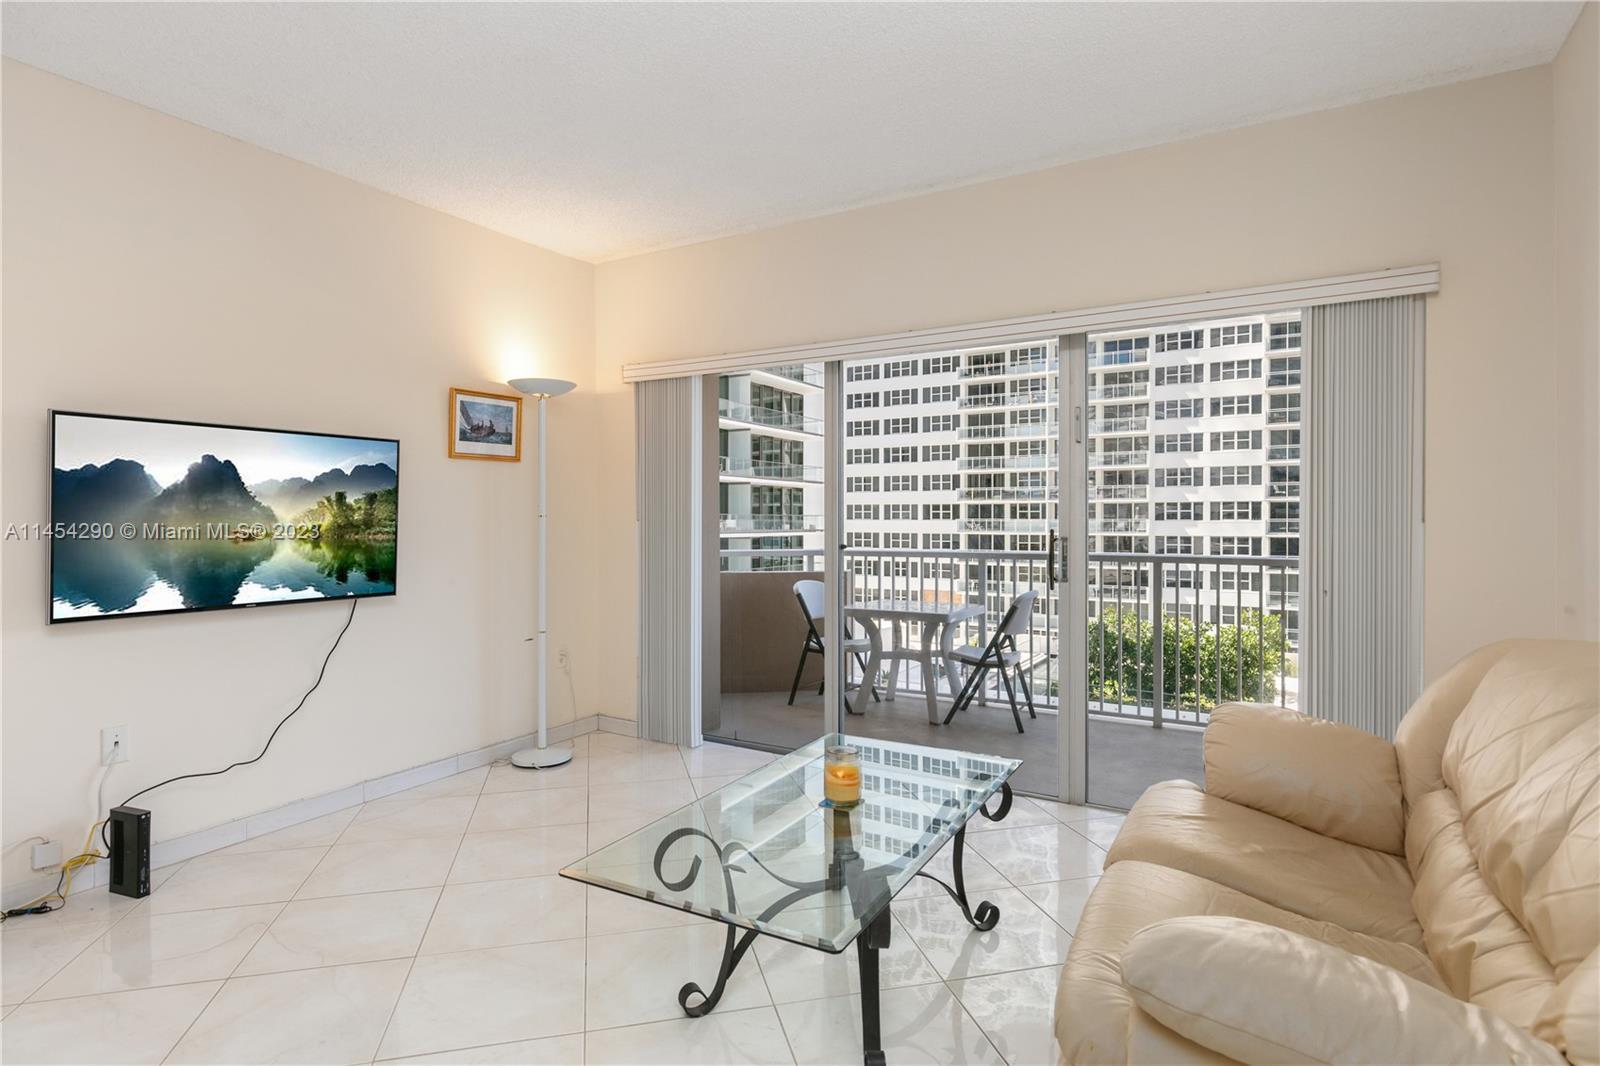 Welcome to this bright and charming 1-bd, 1.5-ba condo featuring tile flooring throughout. This apar